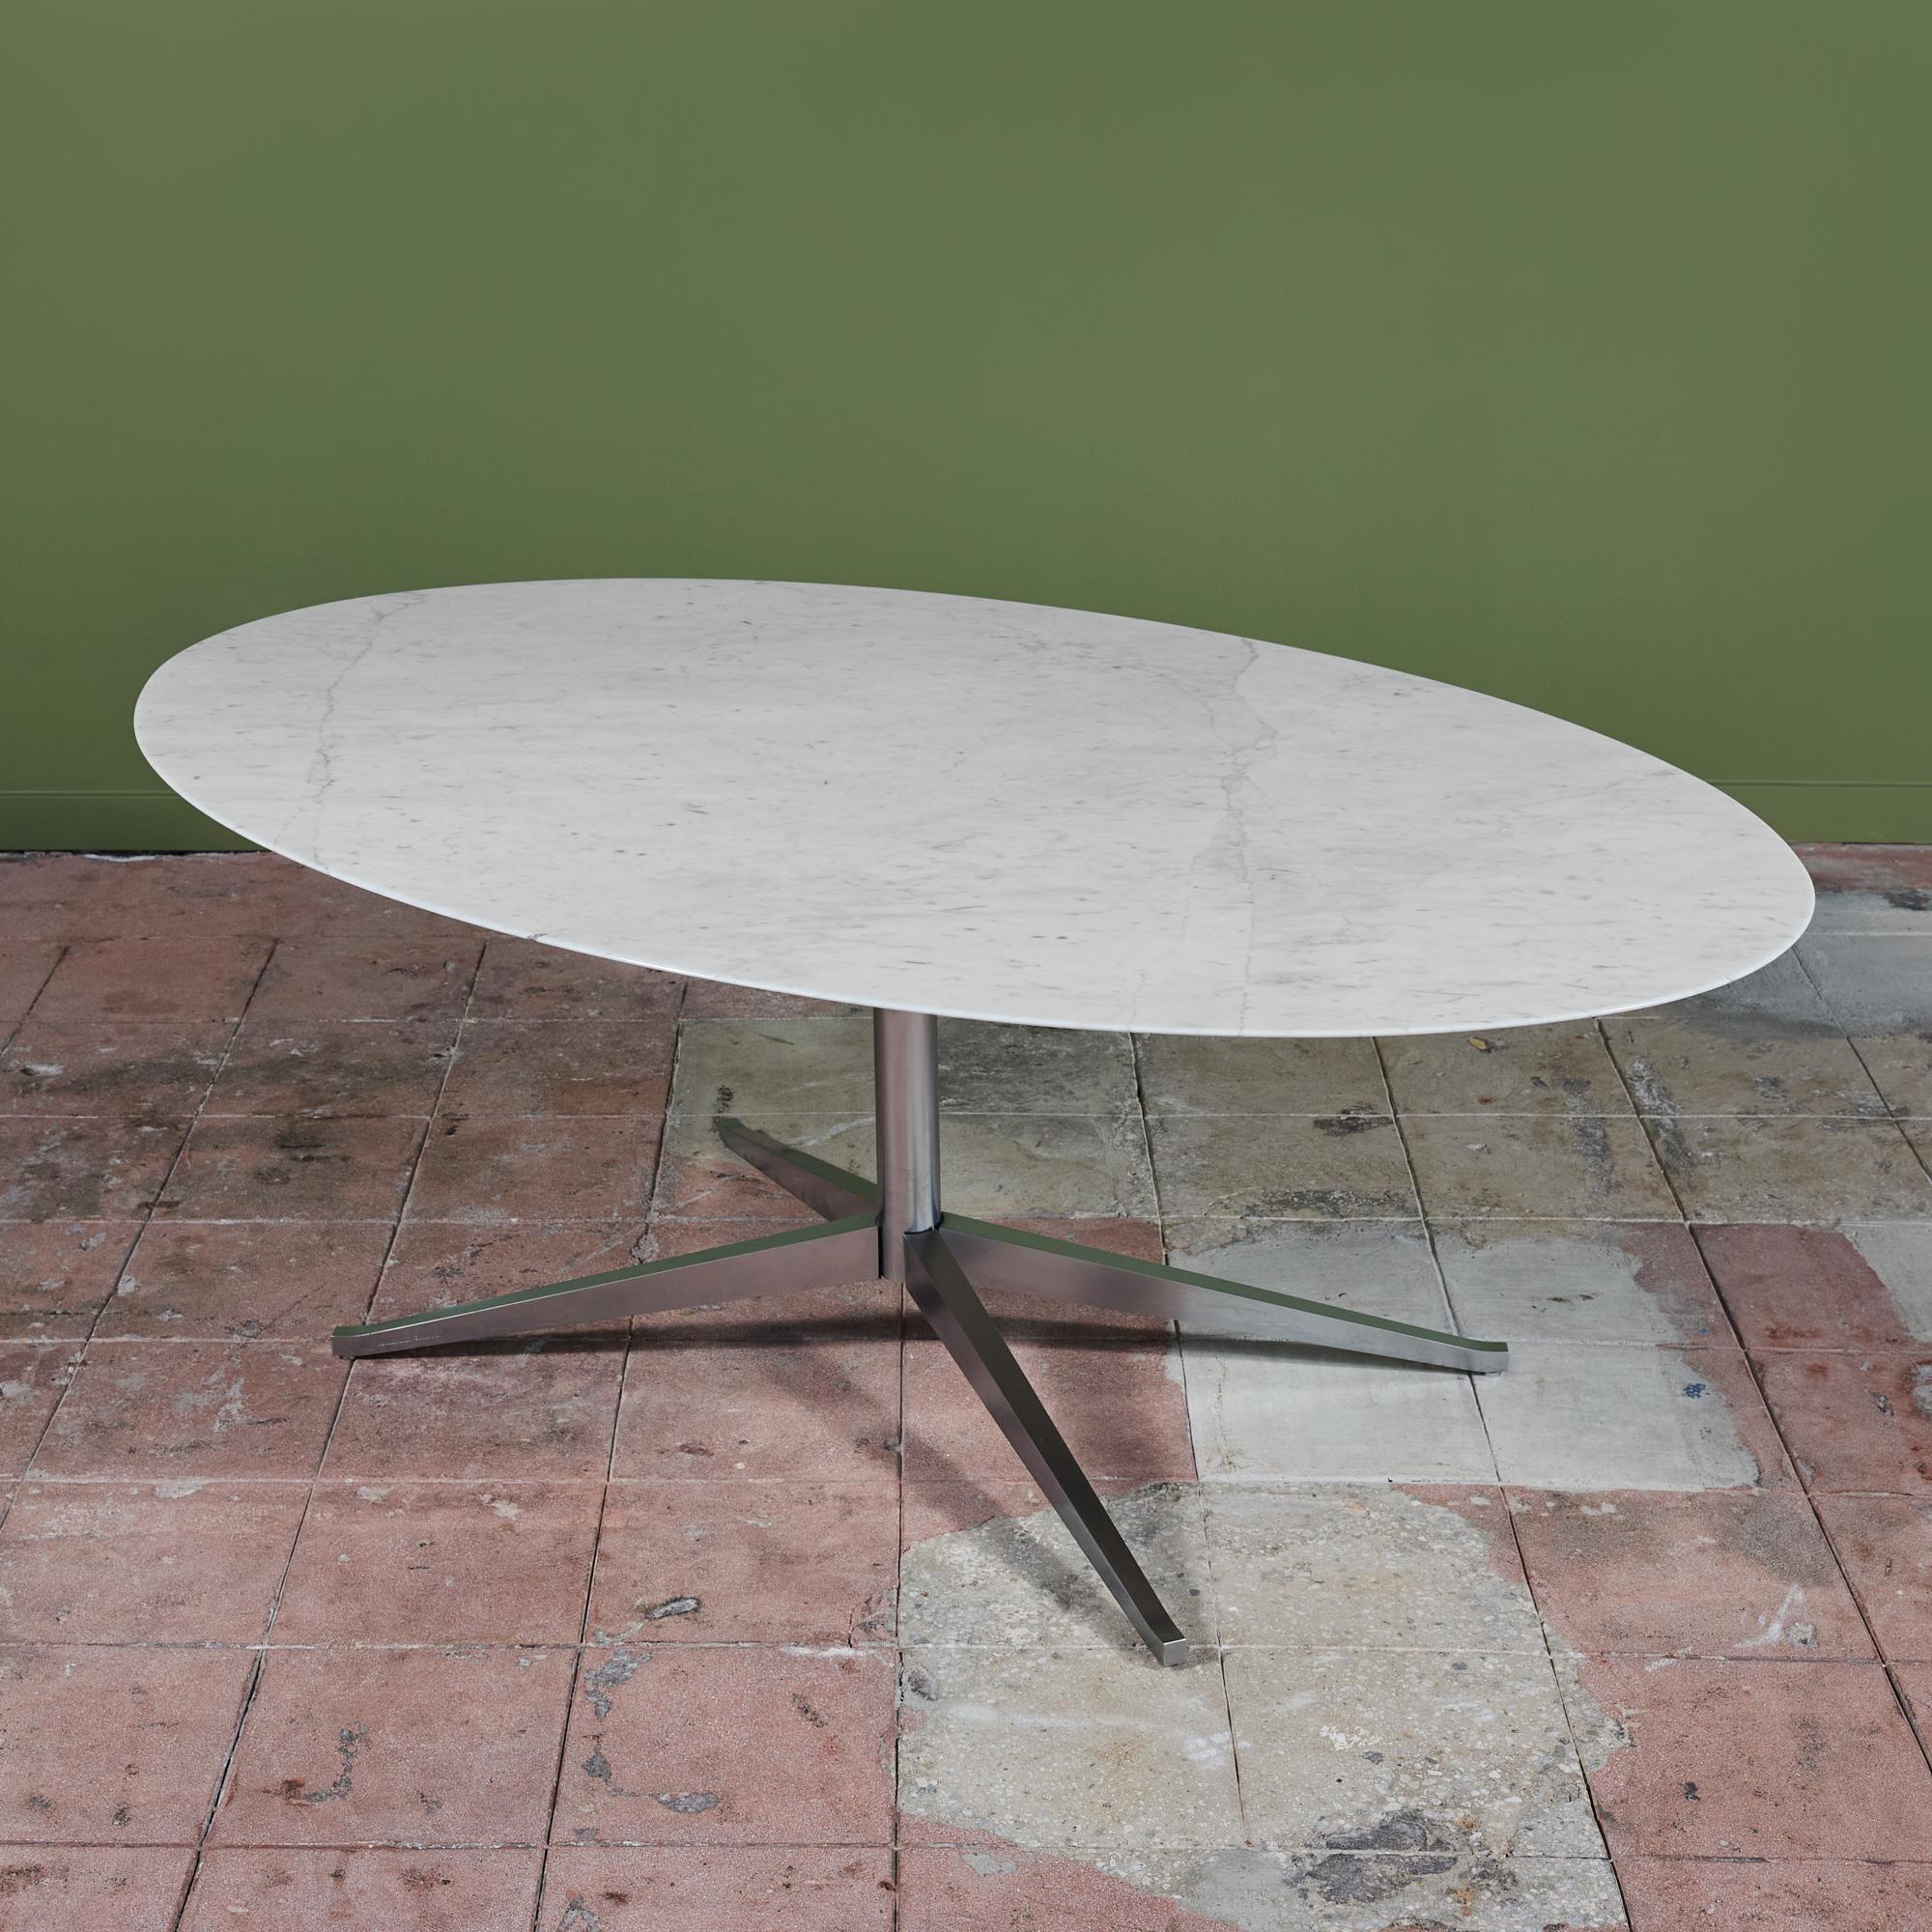 Designed by Florence Knoll in the 1960's, this simple dining table has a steel chrome plated base and gorgeous marble table top. The tabletop features a white marble with light gray and taupe veining throughout. It is perfect for dining or